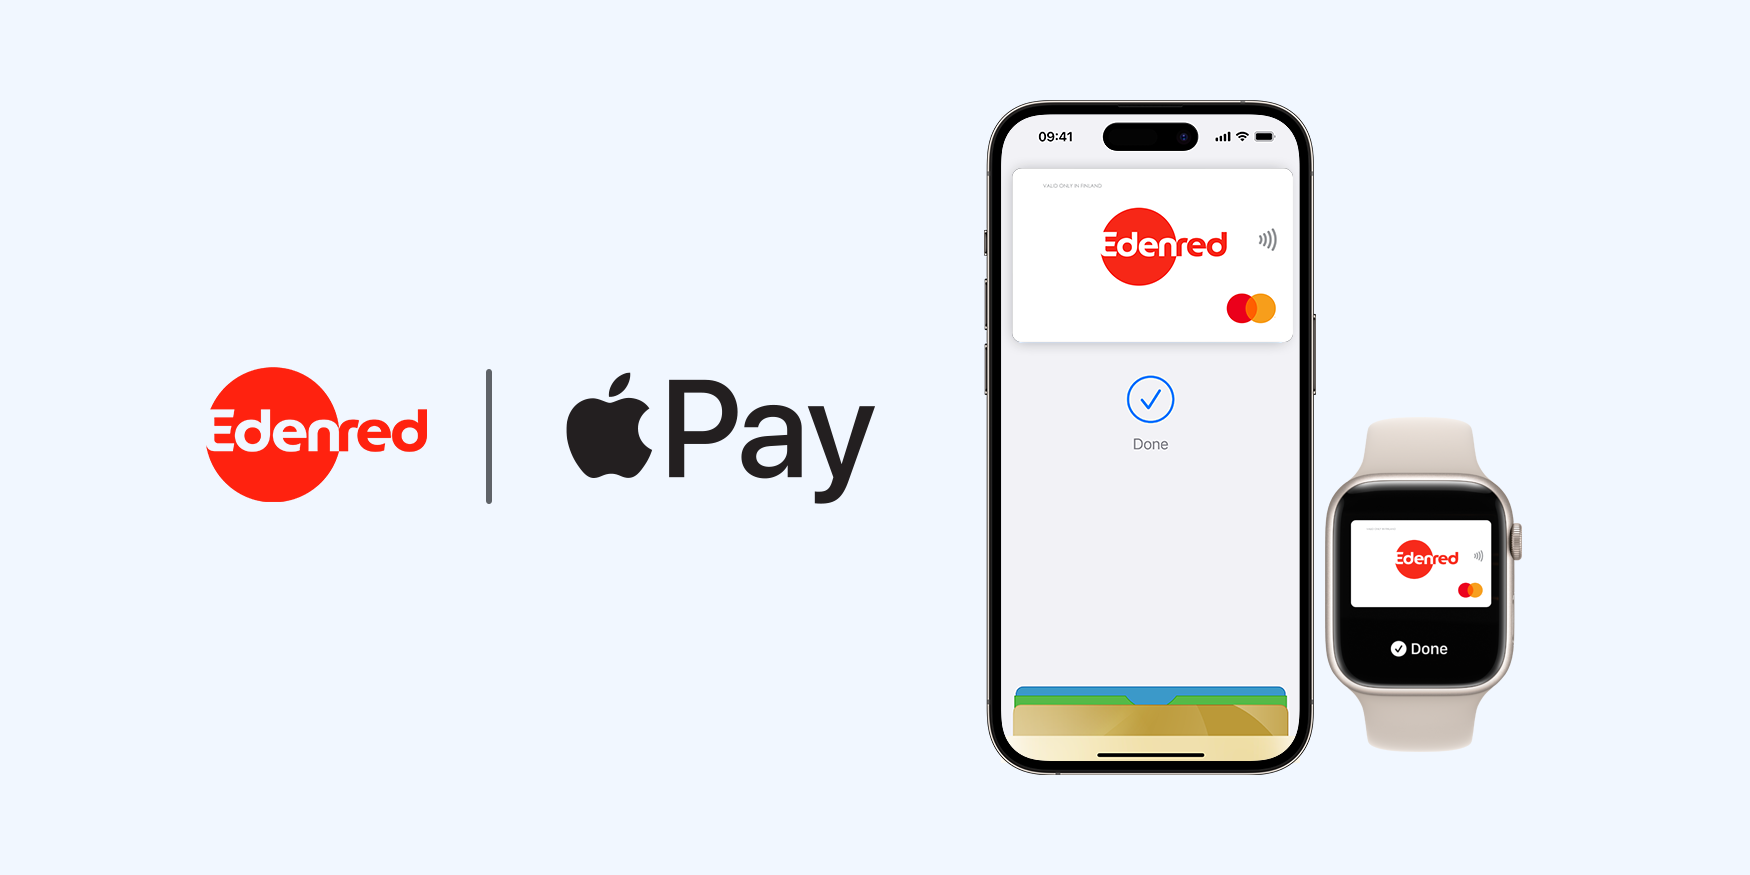 Now all Edenred benefits in Apple Pay